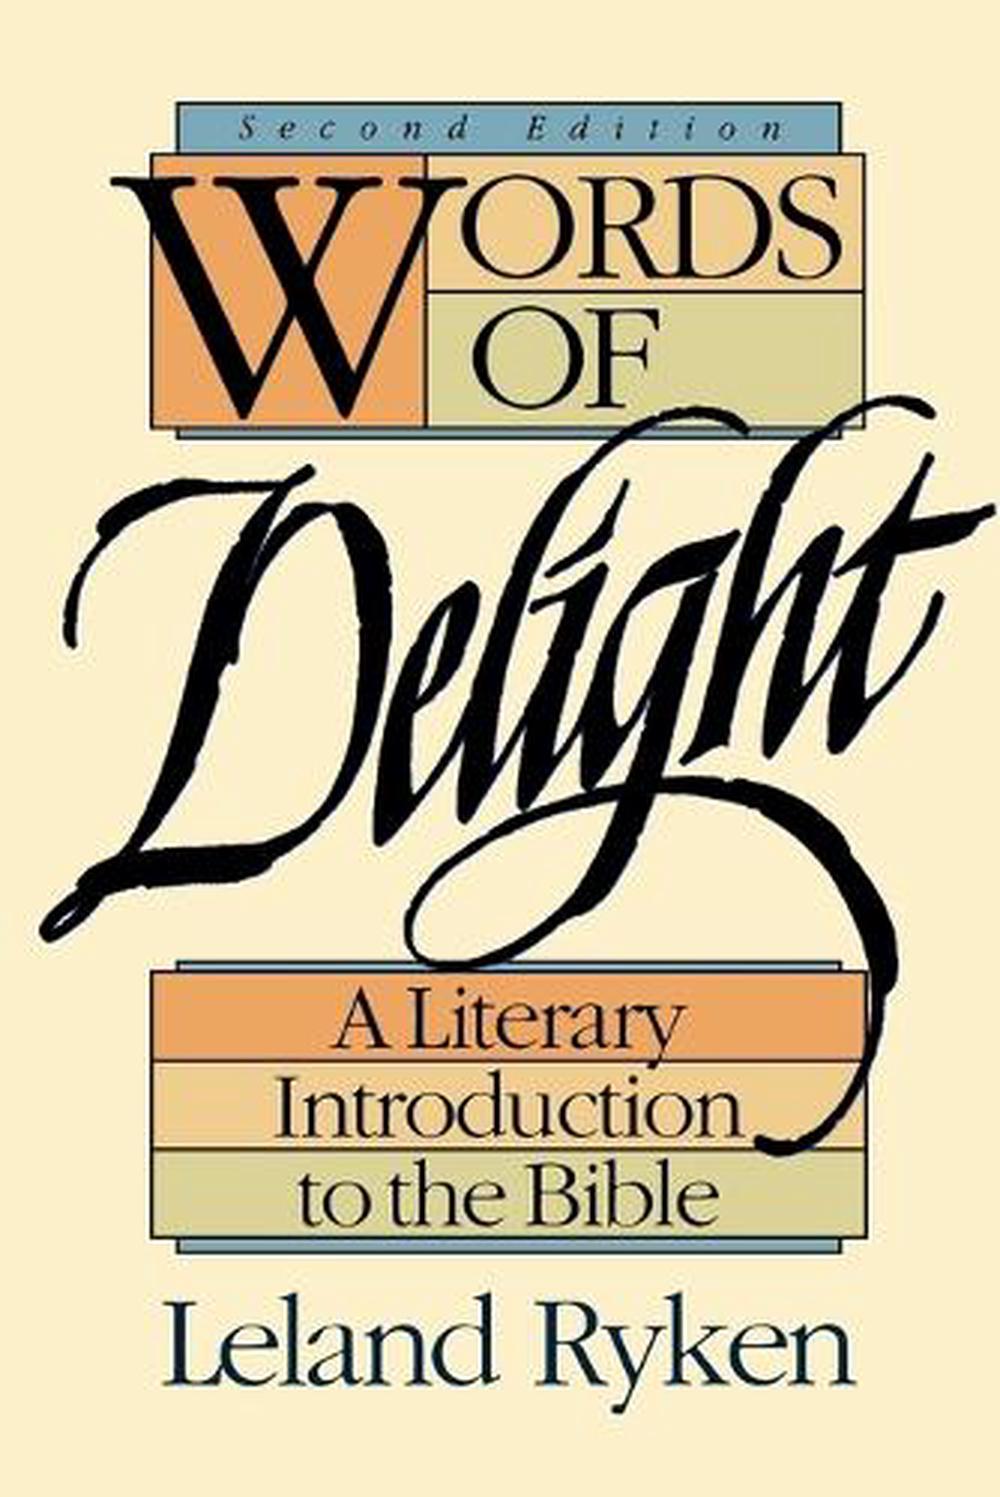 Words of Delight A Literary Introduction to the Bible by Leland Ryken